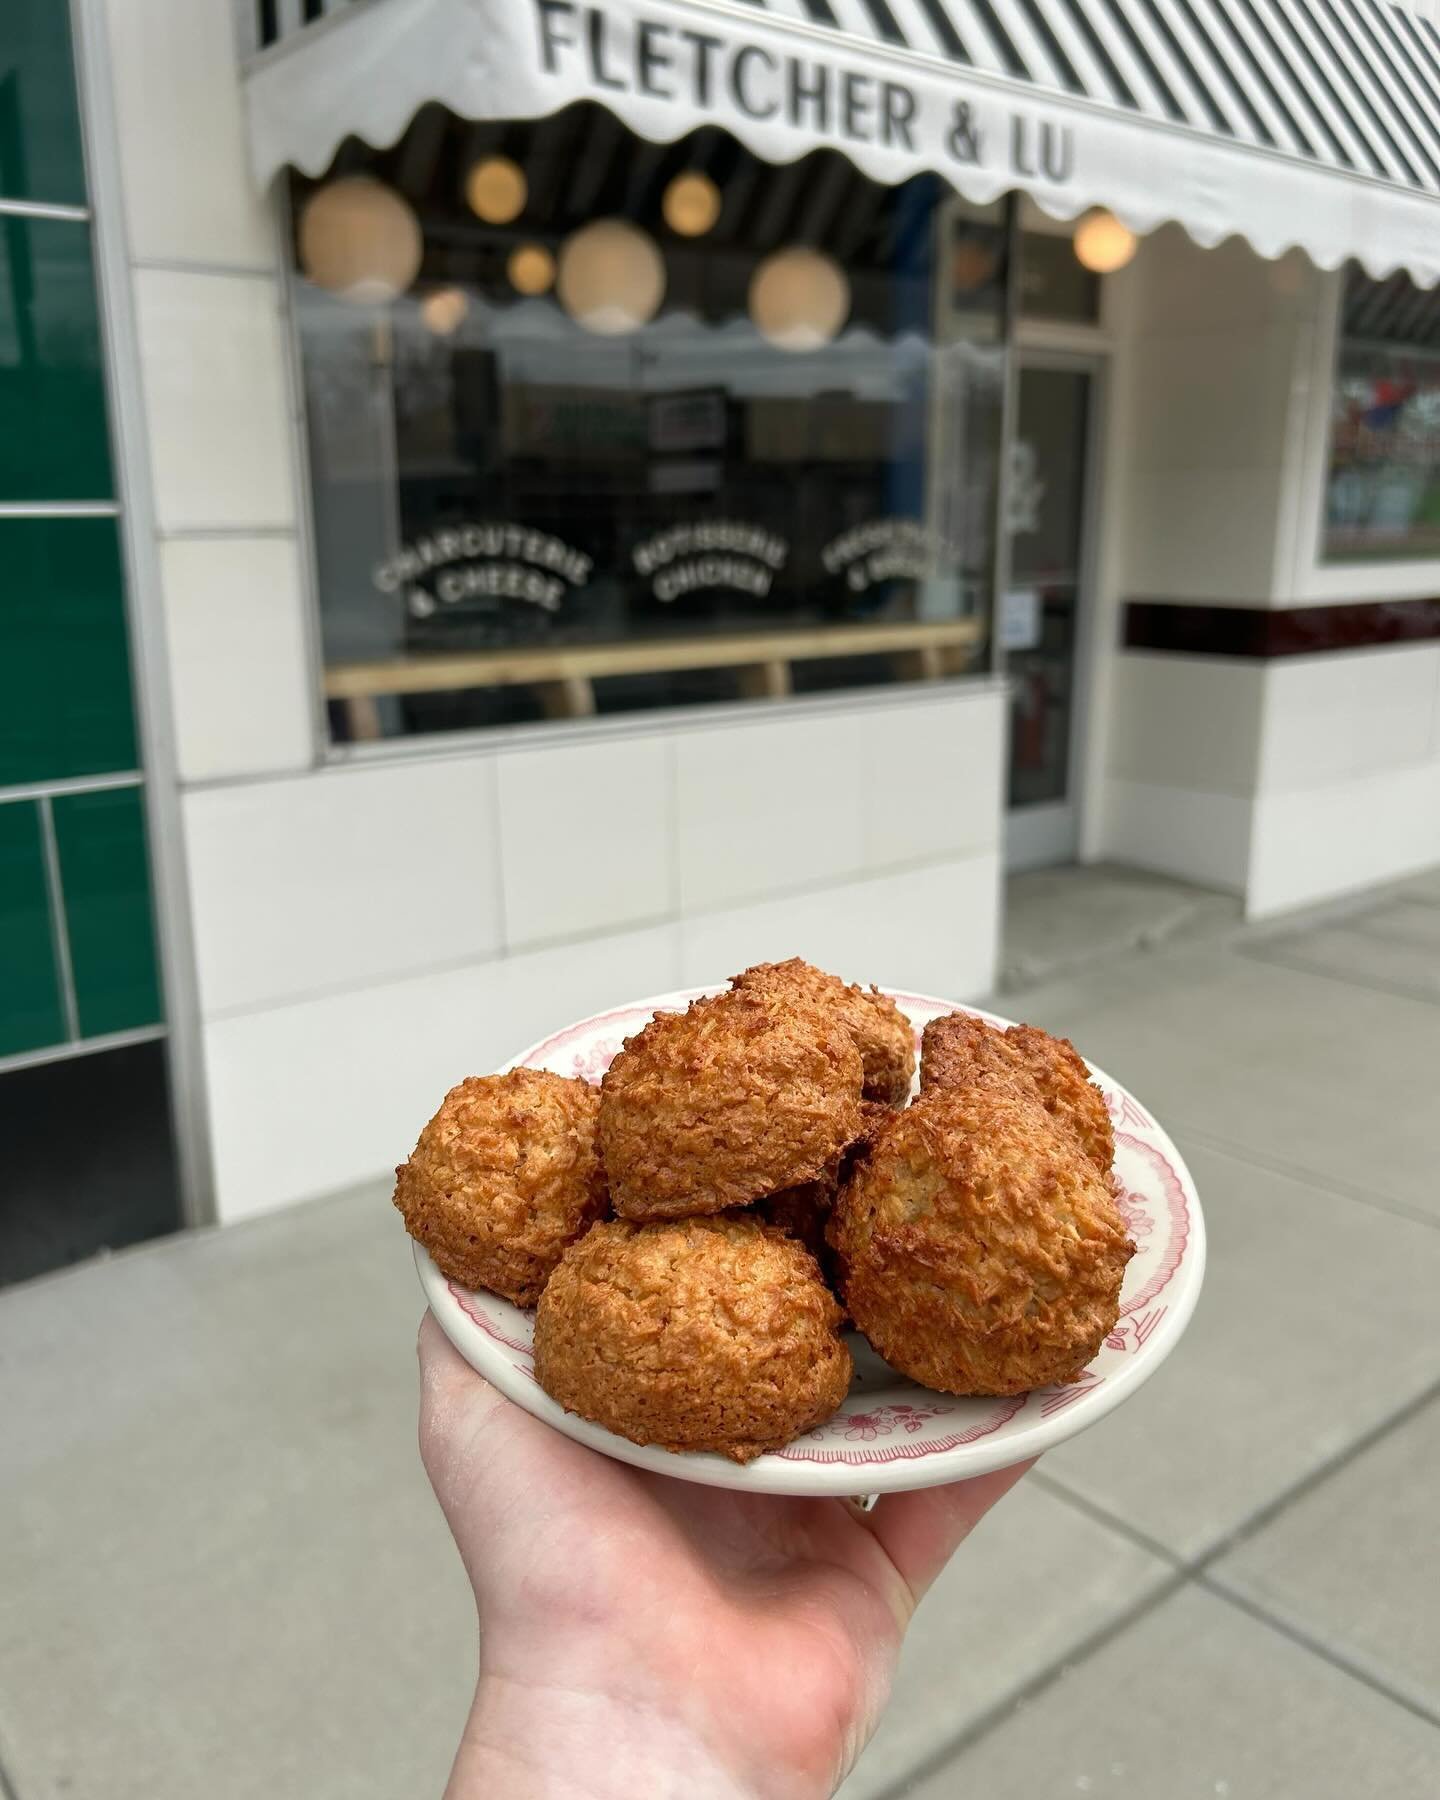 Passover prep is on!! Order your coconut macaroons by the half dozen TODAY for pickup on Saturday. We can dip em in chocolate too! Email us at hello@fletcherandlu.com, and be sure to include a phone number.